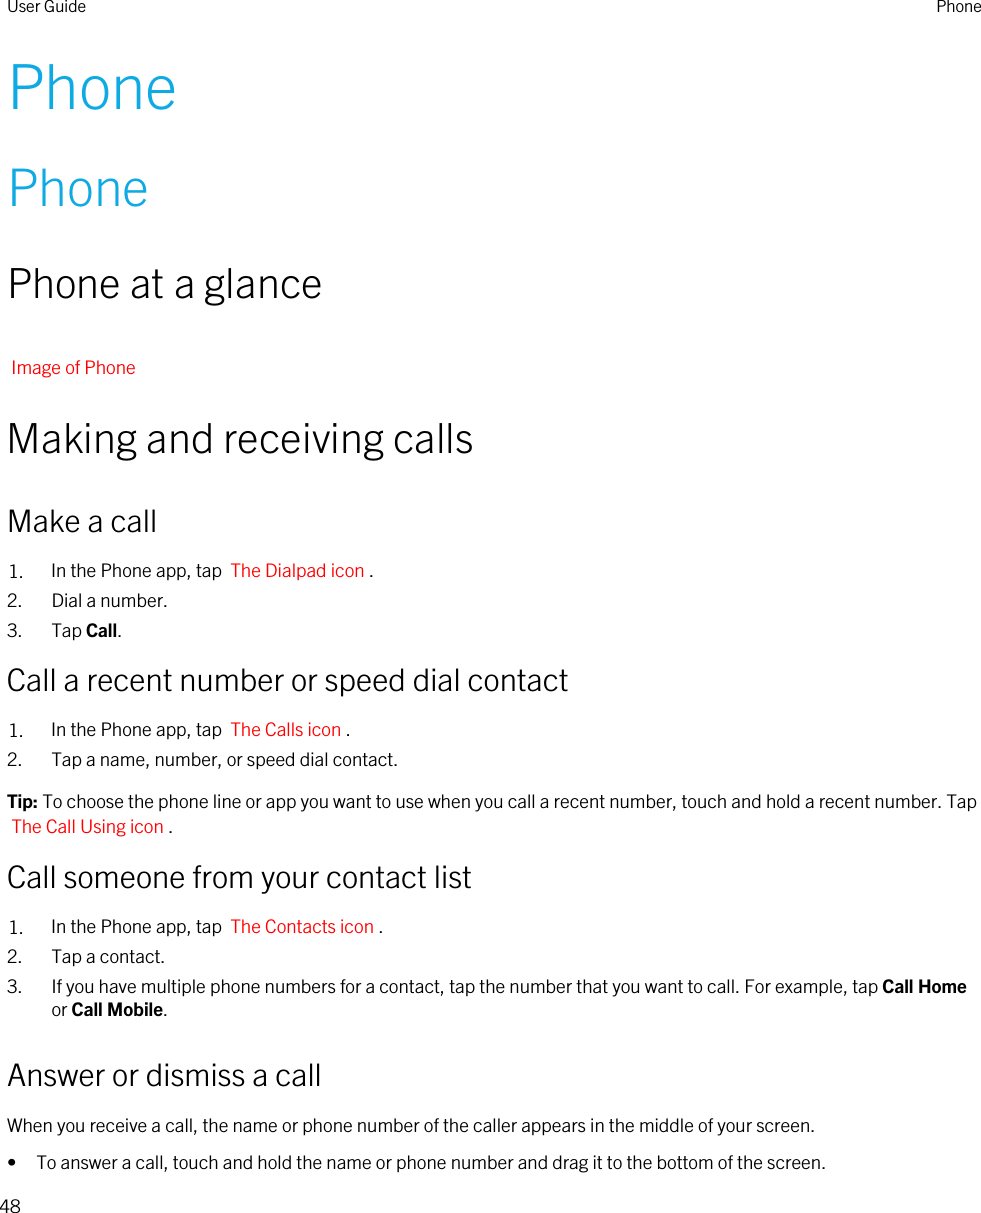 PhonePhonePhone at a glanceImage of PhoneMaking and receiving callsMake a call1. In the Phone app, tap  The Dialpad icon .2. Dial a number.3. Tap Call.Call a recent number or speed dial contact1. In the Phone app, tap  The Calls icon .2. Tap a name, number, or speed dial contact.Tip: To choose the phone line or app you want to use when you call a recent number, touch and hold a recent number. Tap The Call Using icon .Call someone from your contact list1. In the Phone app, tap  The Contacts icon .2. Tap a contact.3. If you have multiple phone numbers for a contact, tap the number that you want to call. For example, tap Call Home or Call Mobile.Answer or dismiss a callWhen you receive a call, the name or phone number of the caller appears in the middle of your screen.• To answer a call, touch and hold the name or phone number and drag it to the bottom of the screen.User Guide Phone48